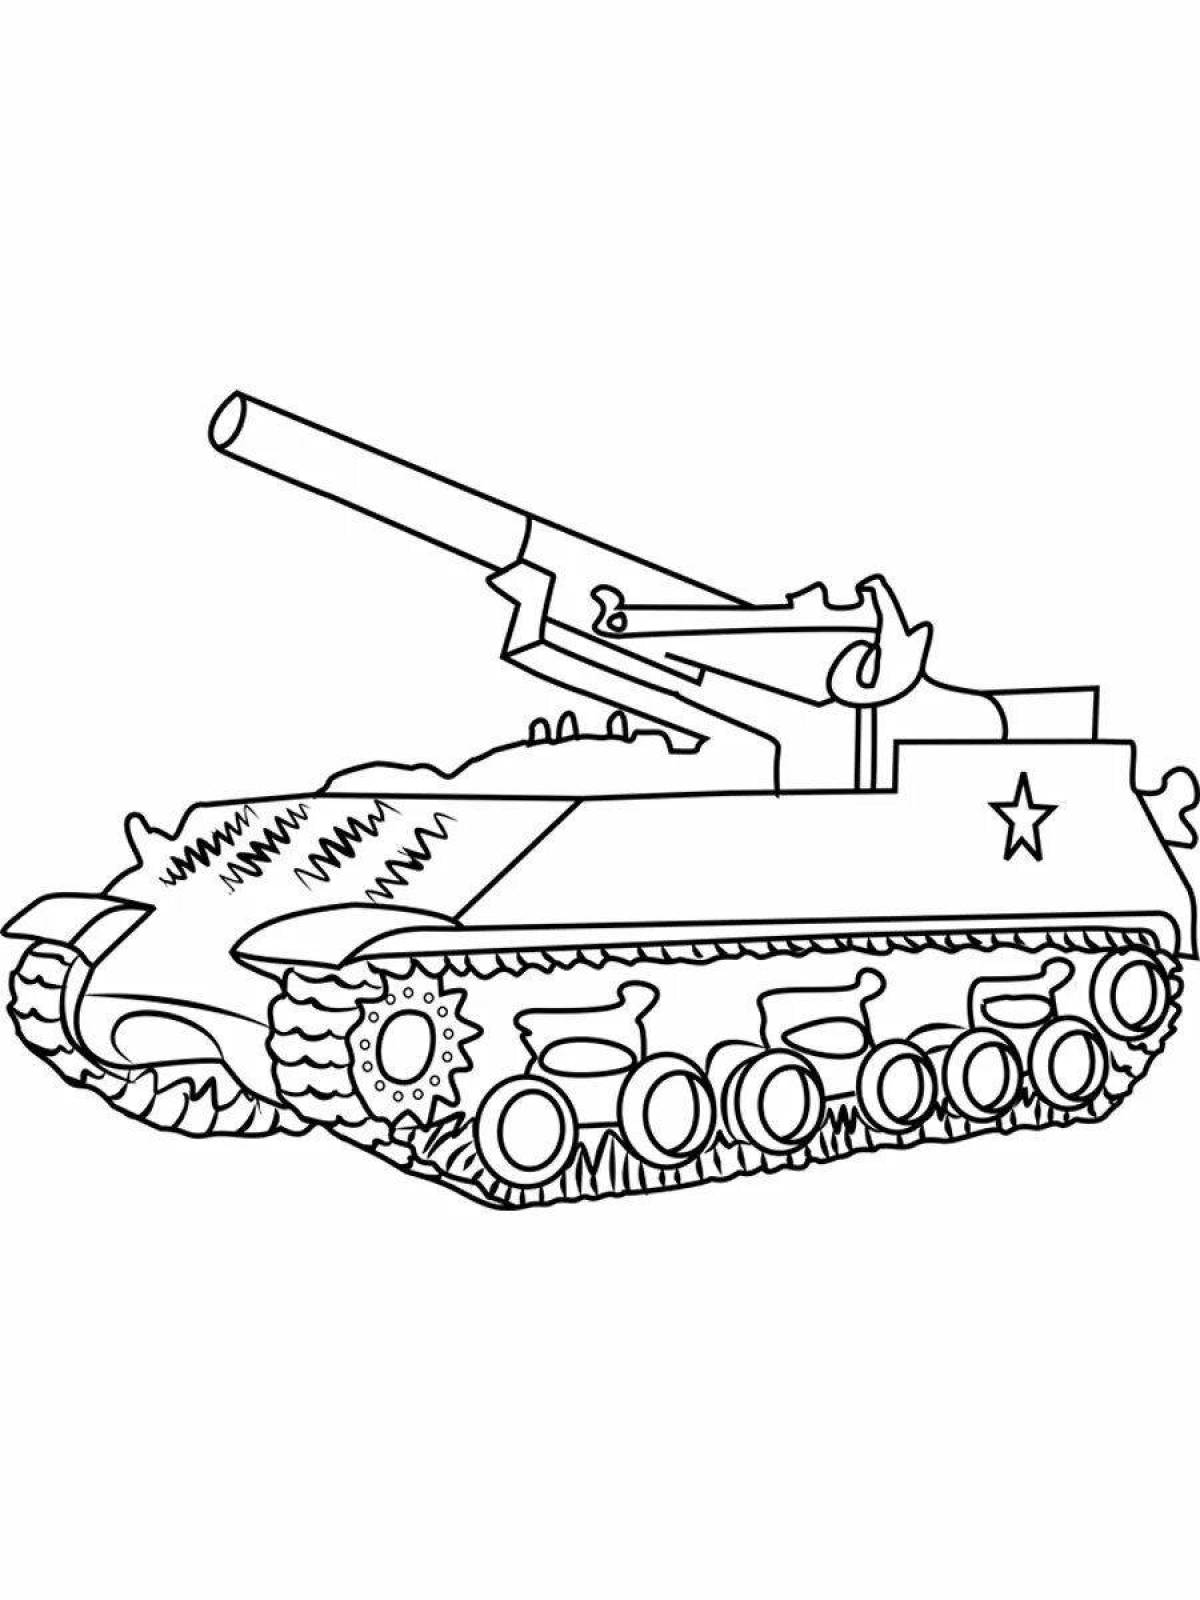 Colorful cartoon tank coloring book for kids